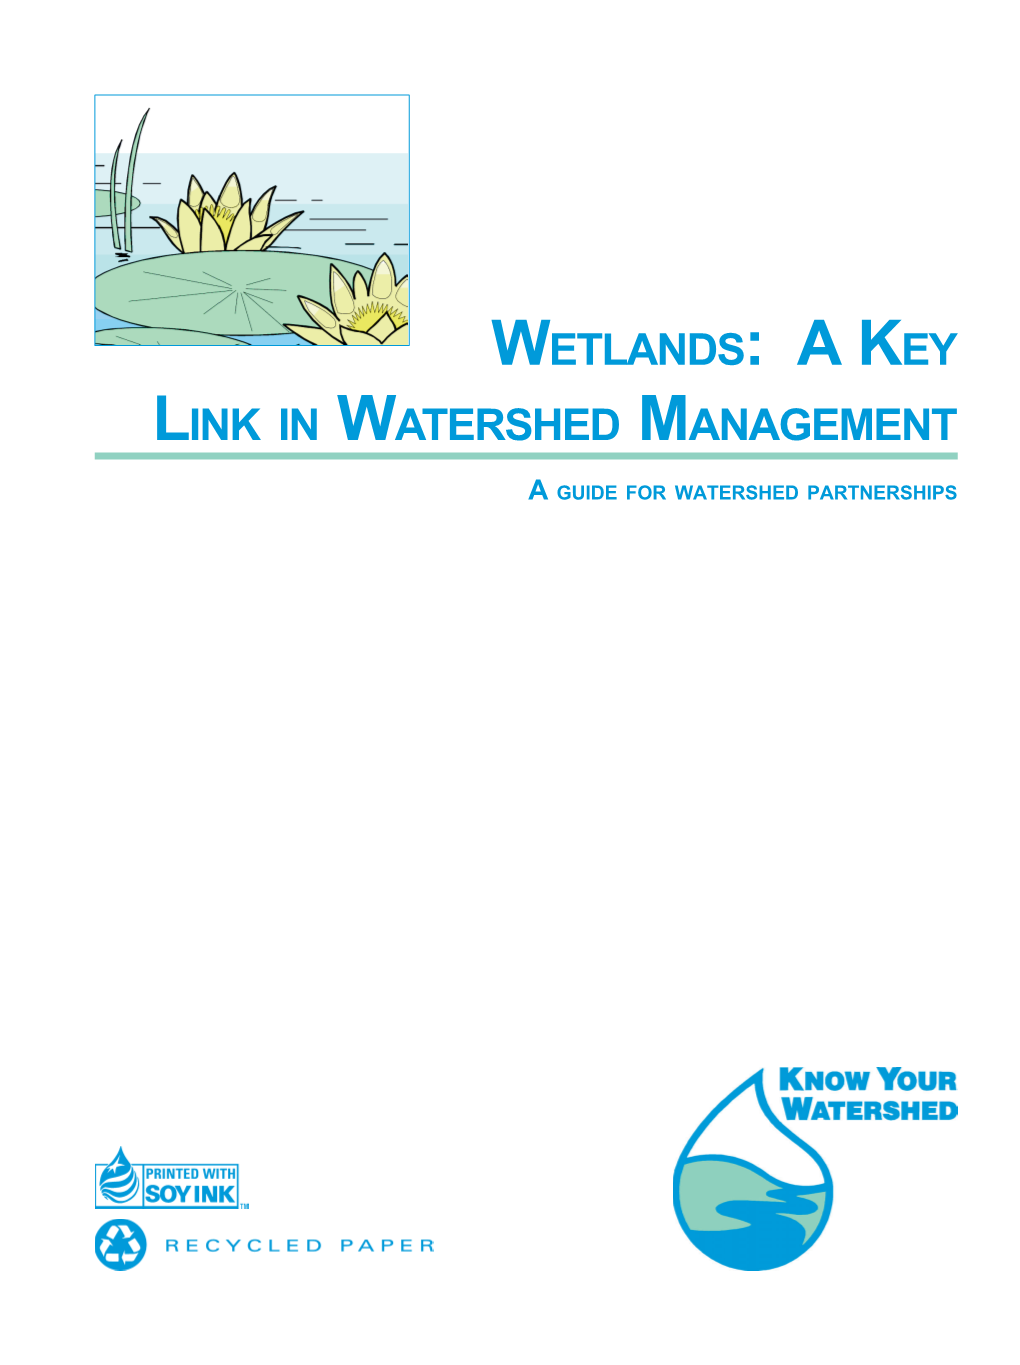 Wetlands: a Key Link in Watershed Management